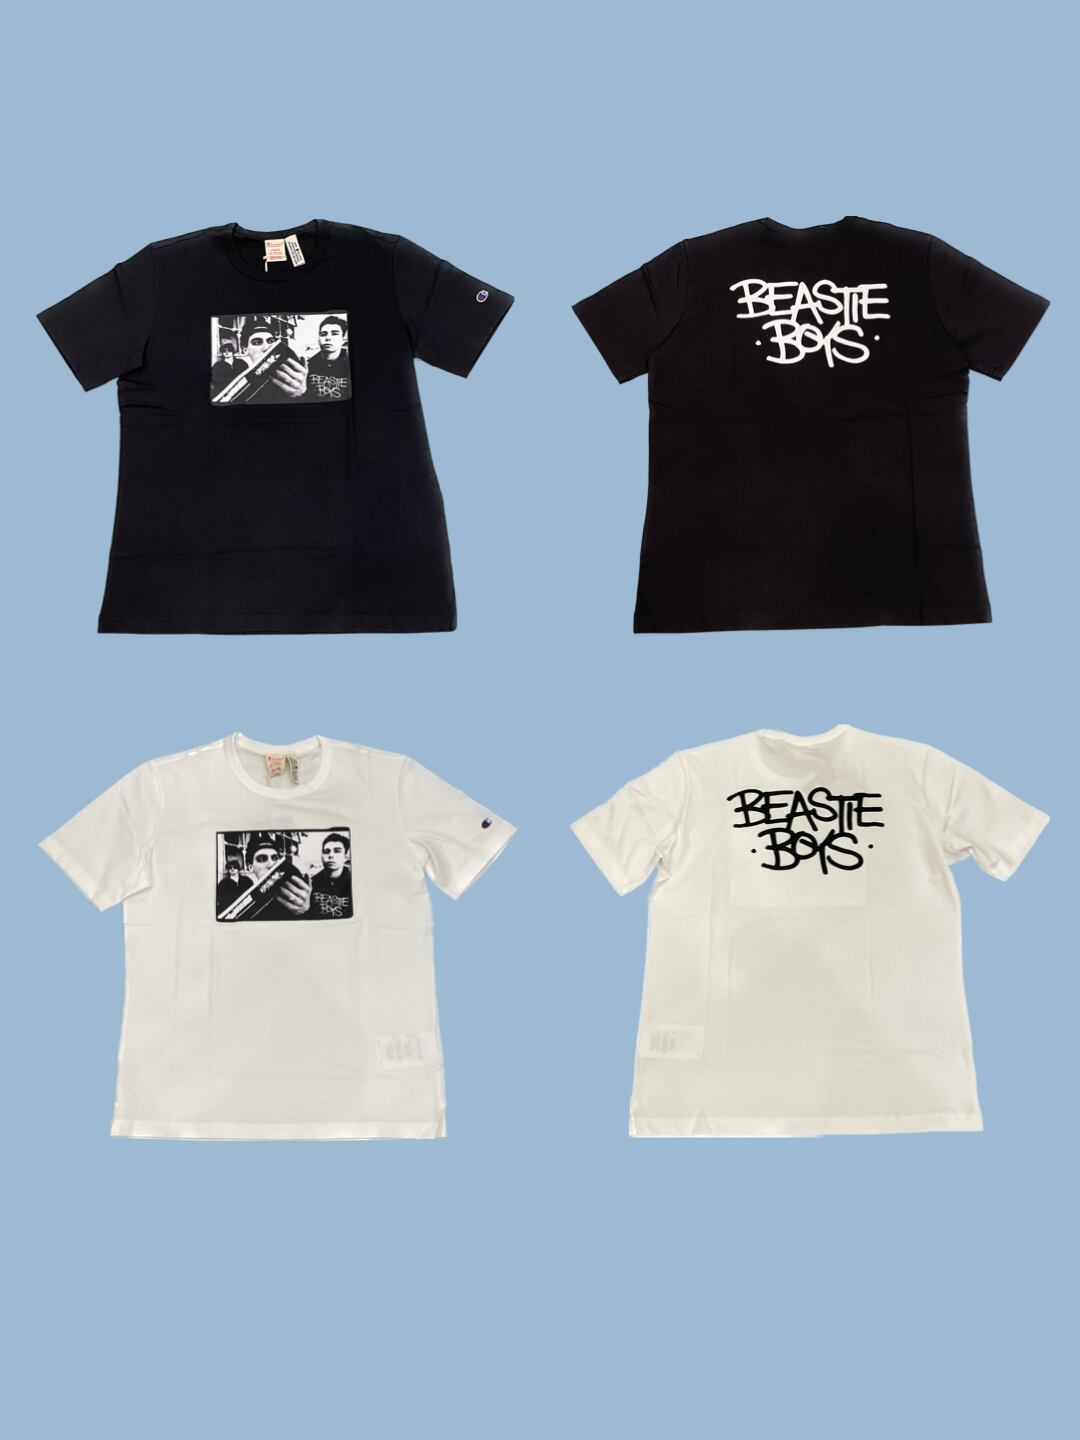 Beastie Boys × Champion【S/S TEE】 | LARGE LAB TOWN powered by BASE